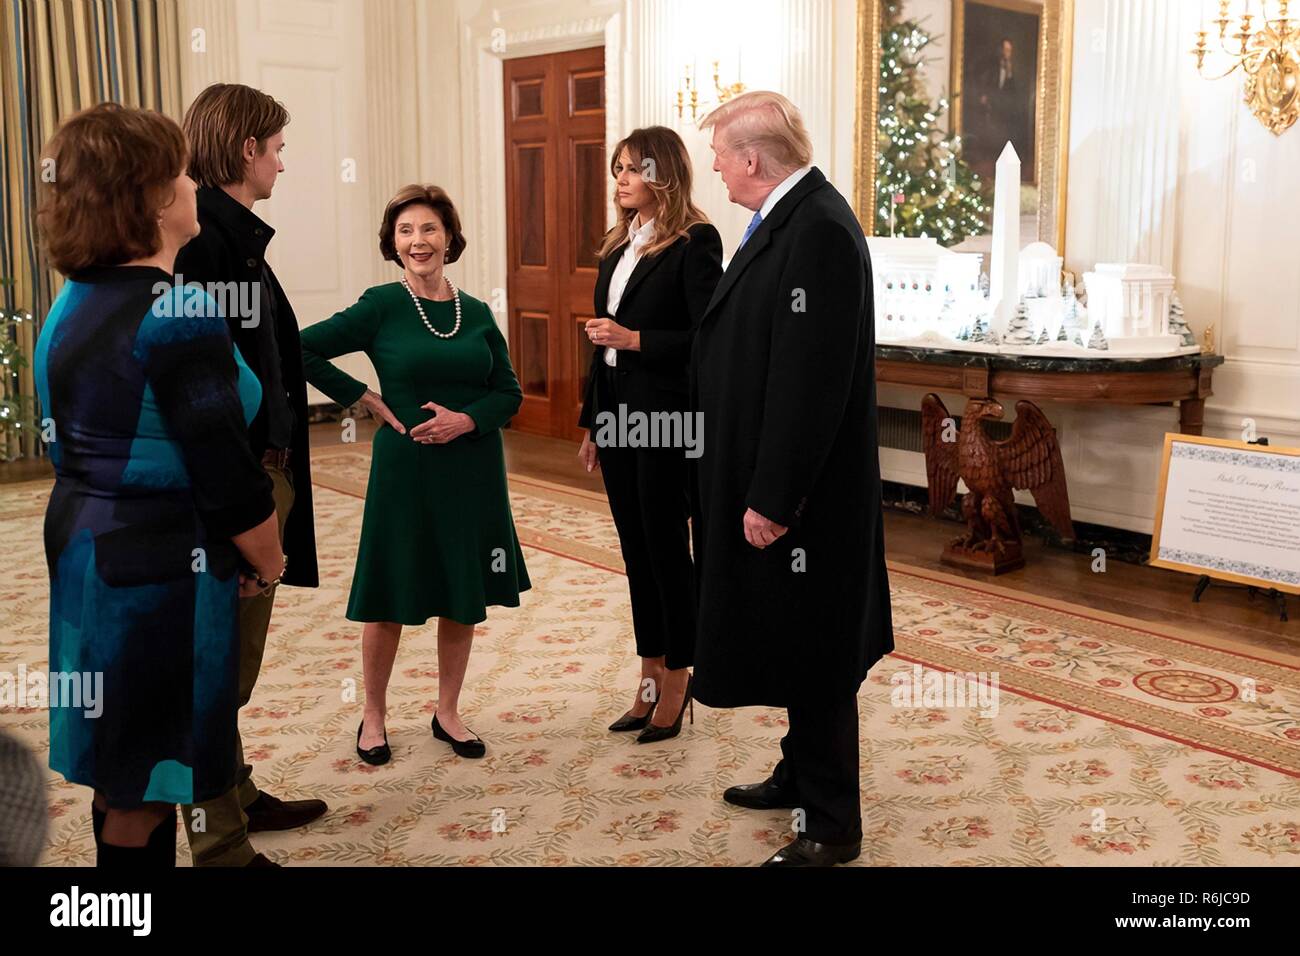 Washington DC, USA. 4th December, 2018. U.S President Donald Trump and First Lady Melania Trump chat with former First Lady Laura Bush, center, and Bush family members in the State Dining Room of the White House December 4, 2018 in Washington, DC. Bush is staying at Blair House to attend the memorial service for his father the late President George H.W. Bush. Credit: Planetpix/Alamy Live News Stock Photo